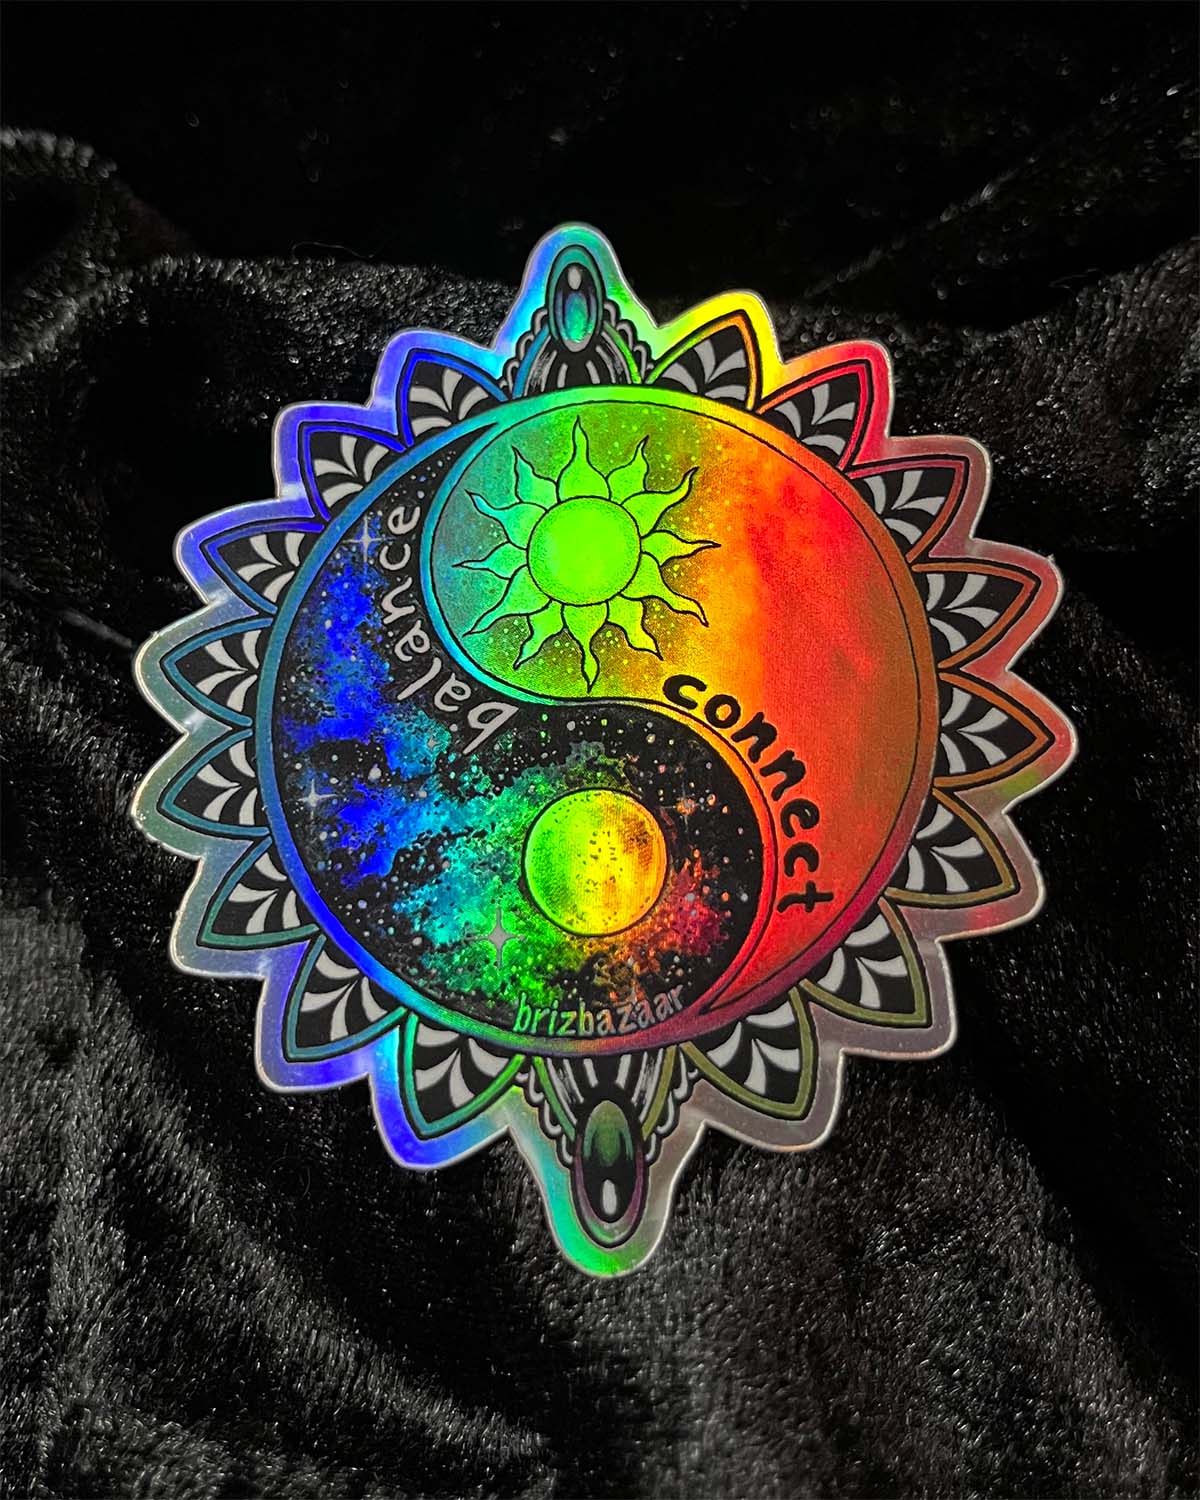 Holographic sticker of Connect